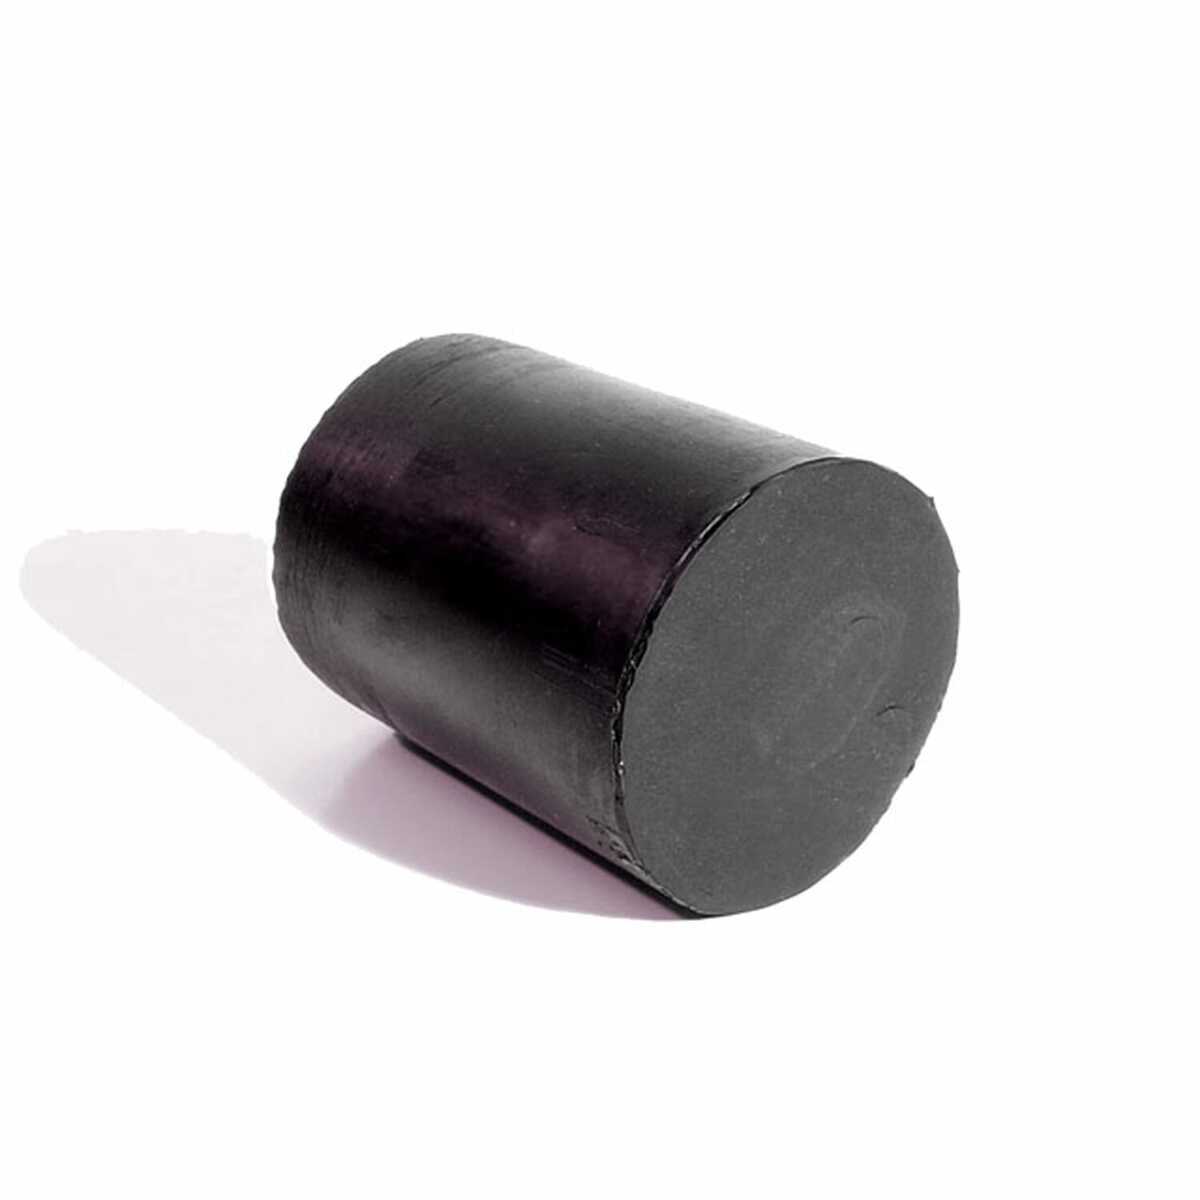 Solid Rubber Cylinder for Universal Applications 1 Piece EDMP Rubber